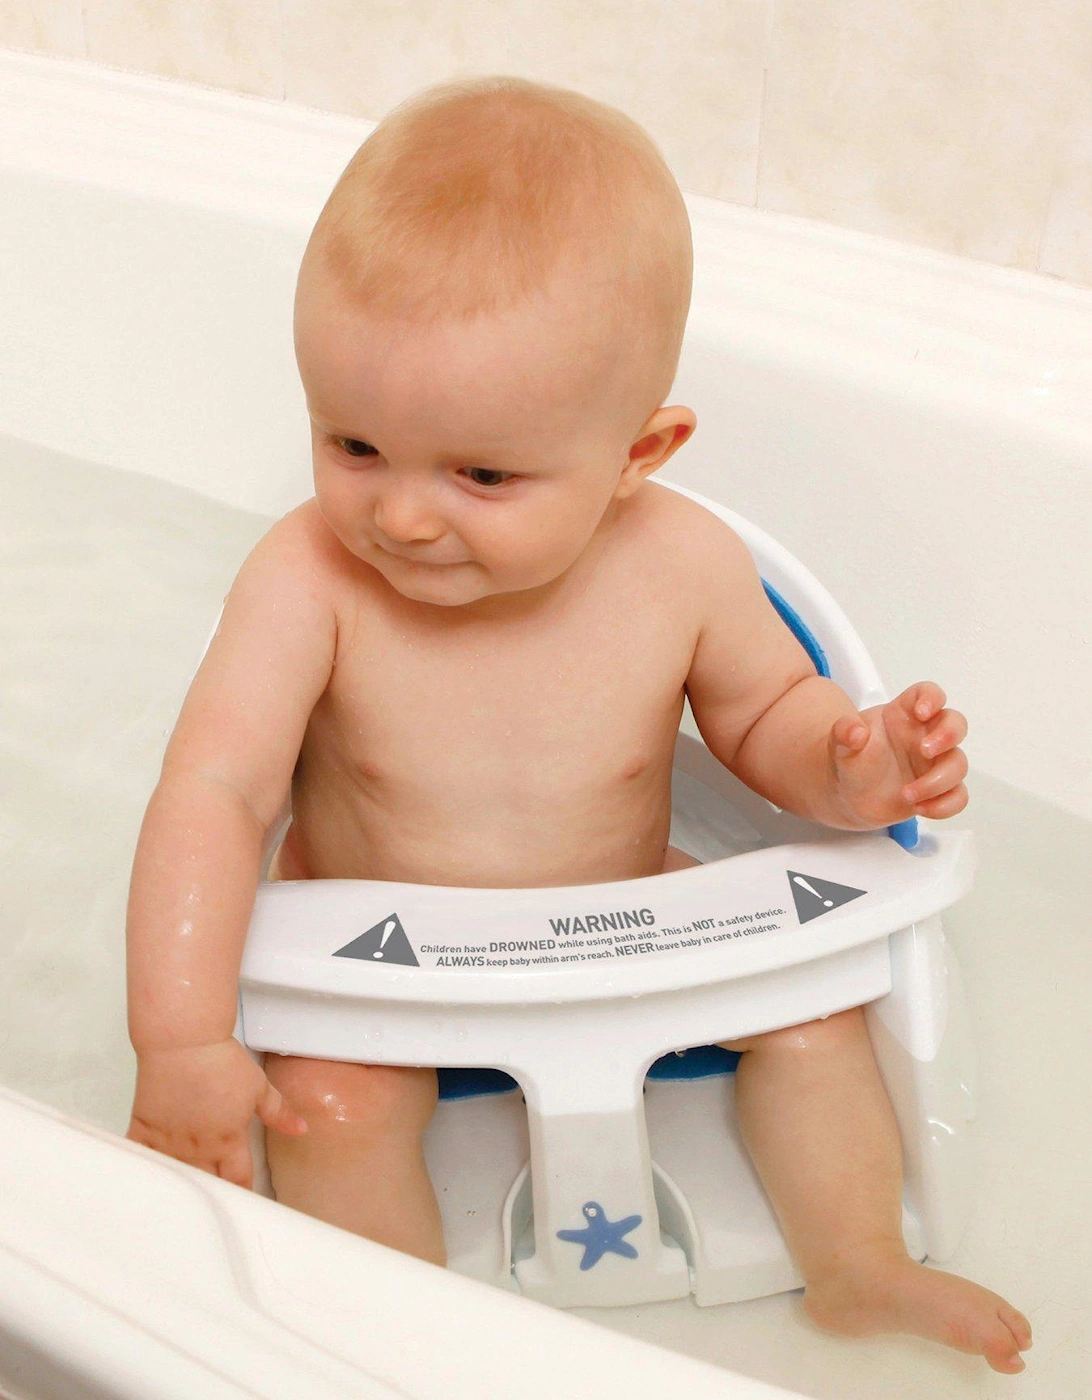 Deluxe Bath Seat with Foam Padding and Heat Sensor - Blue/White